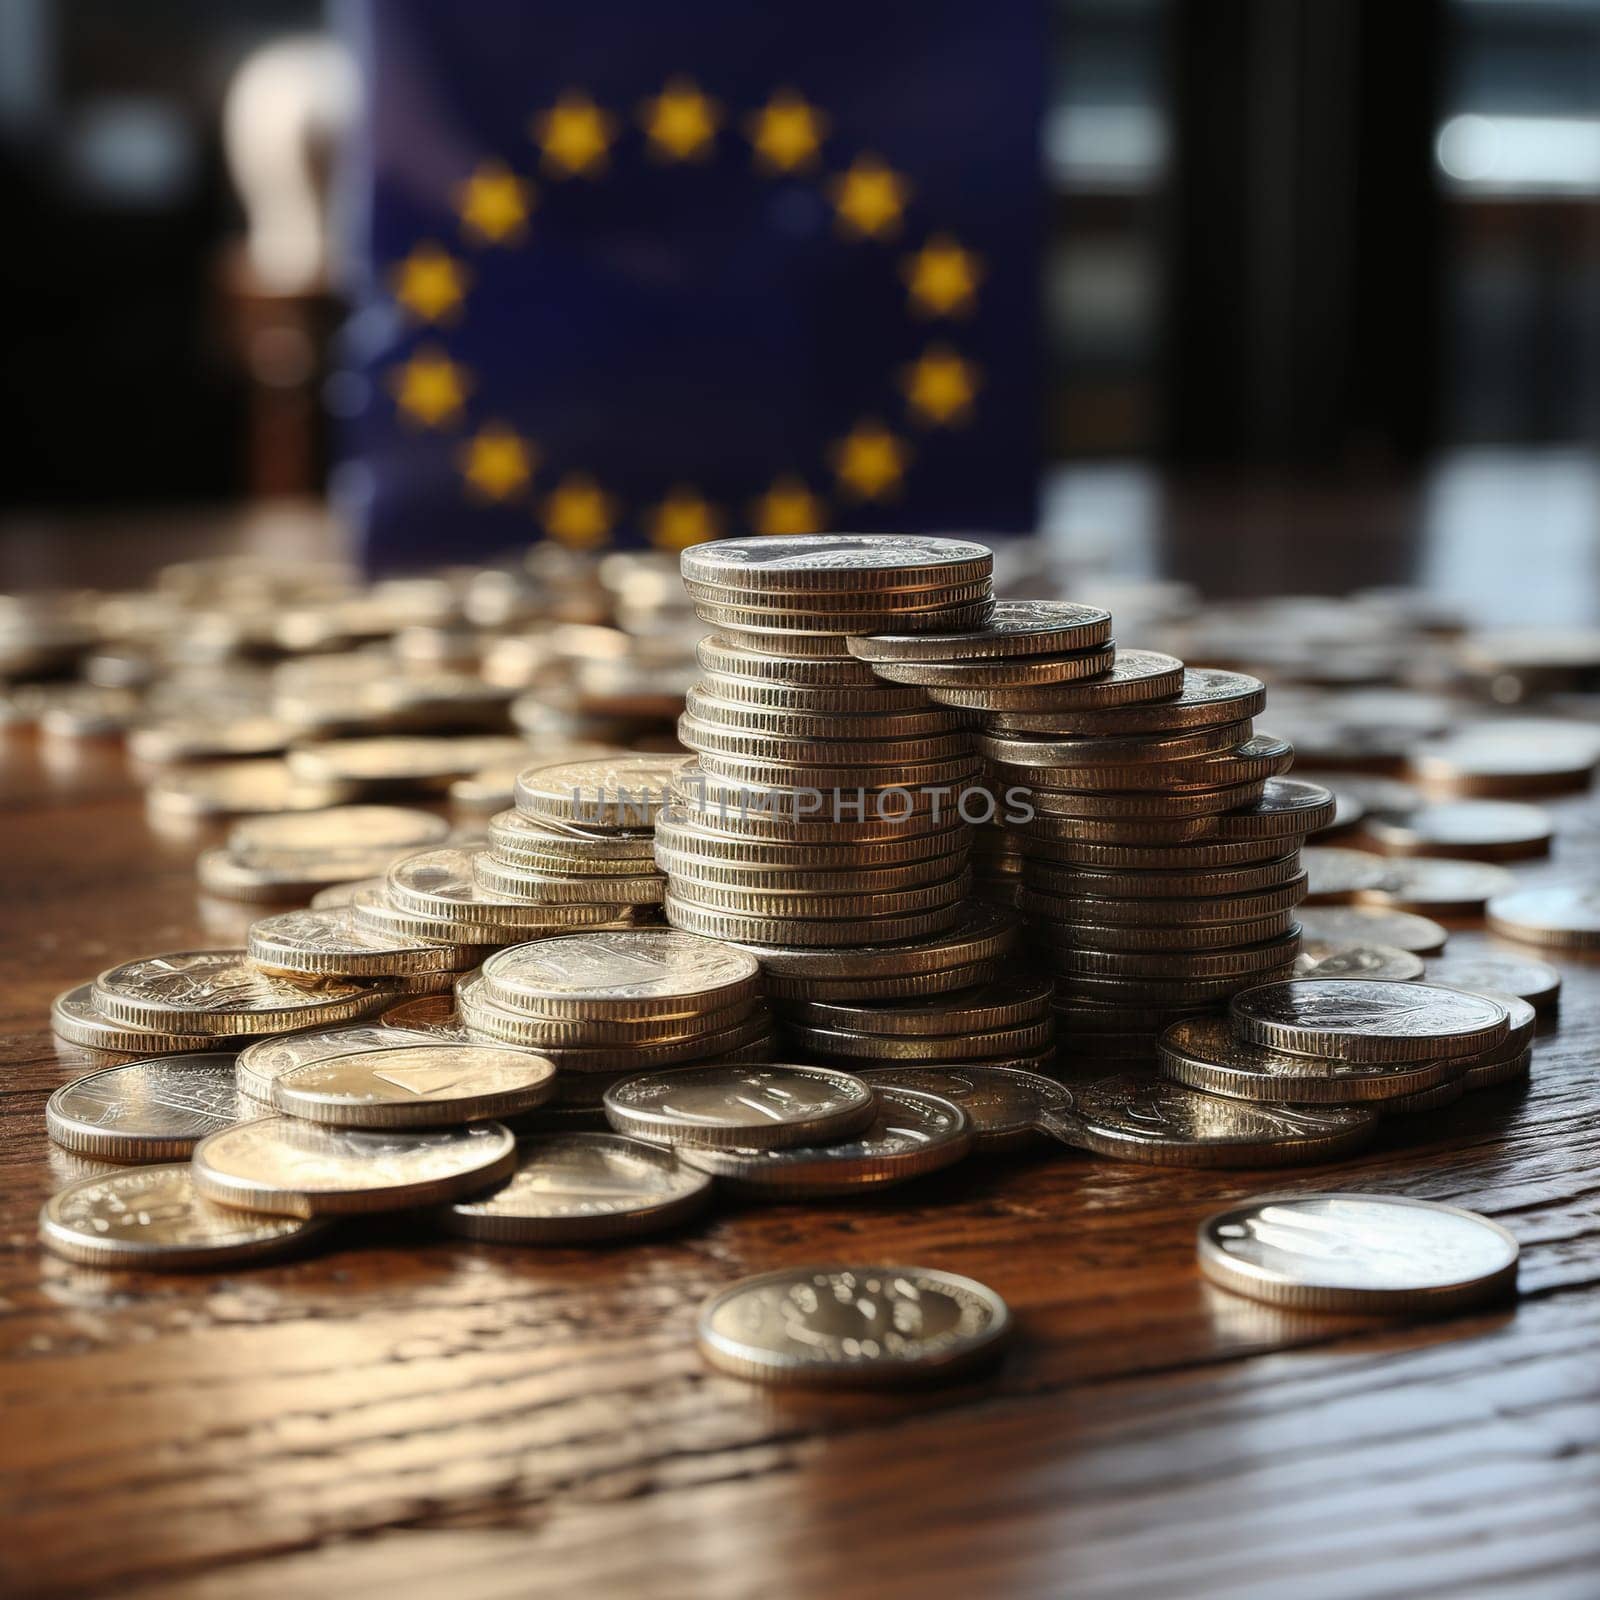 Stacks of coins on a wooden surface against the background of a blurred EU flag.